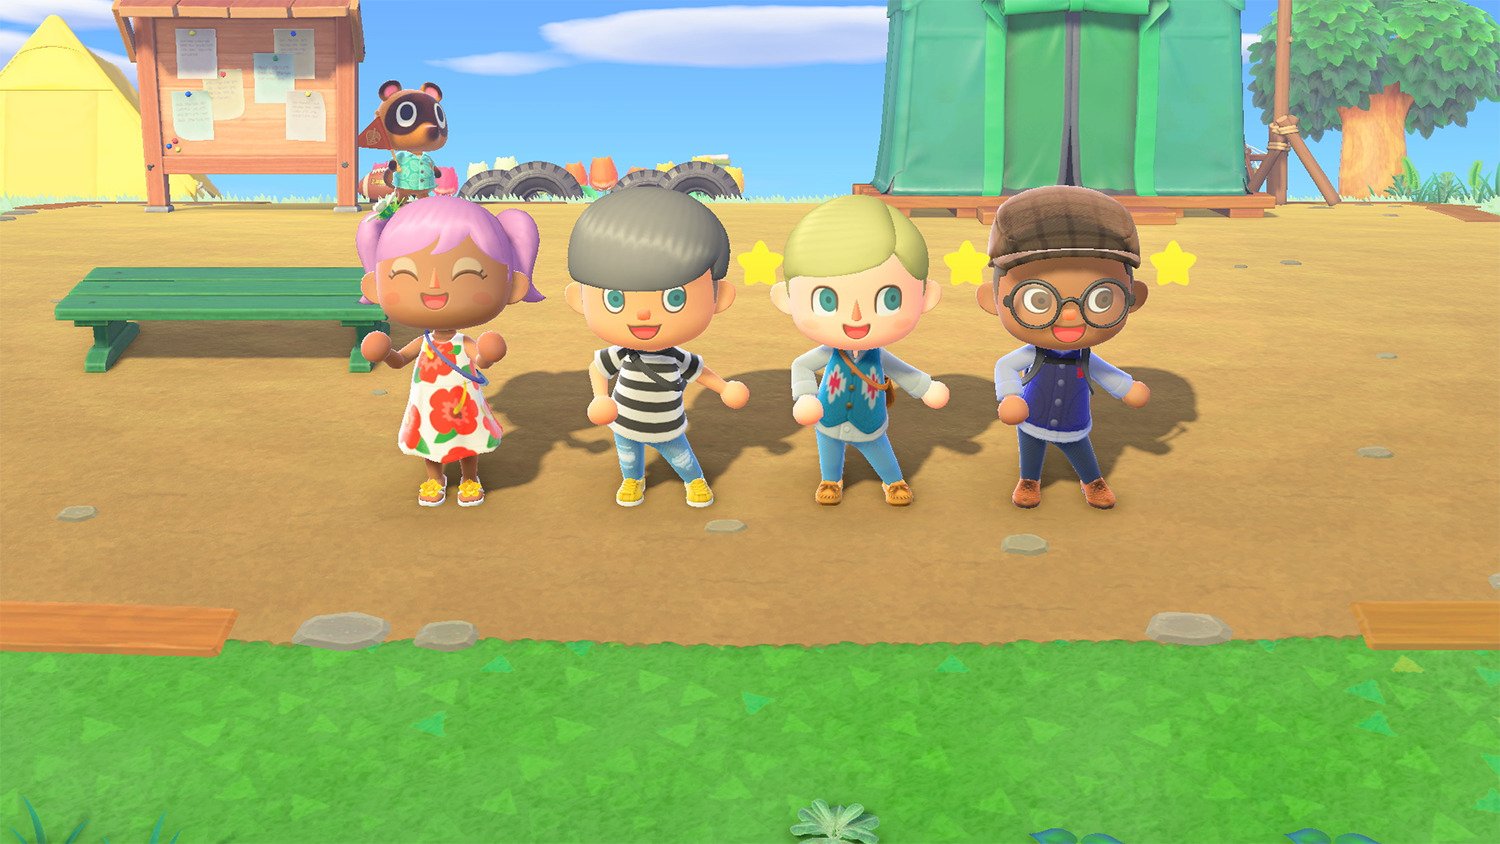 Four villagers in Animal Crossing: New Horizons